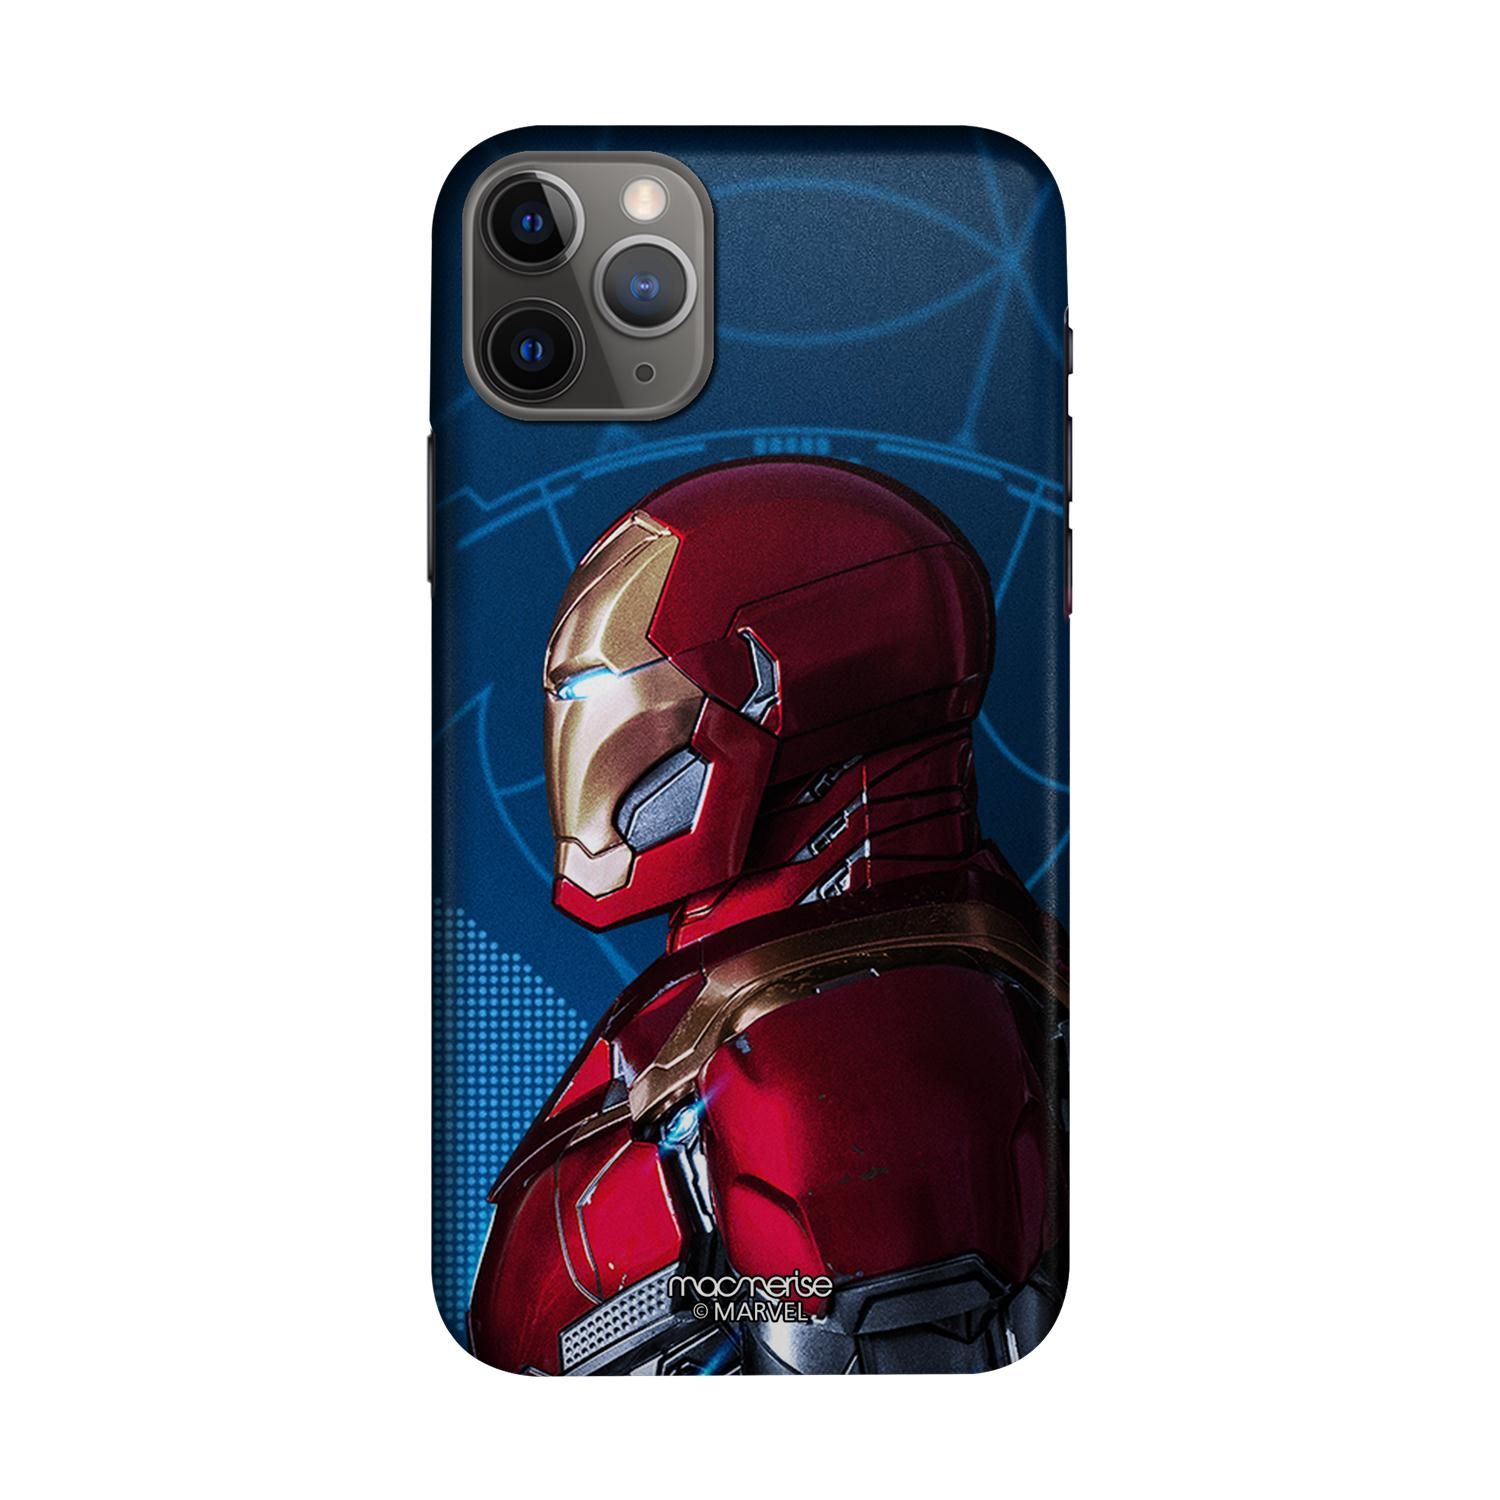 Buy Iron Man side Armor - Sleek Phone Case for iPhone 11 Pro Max Online